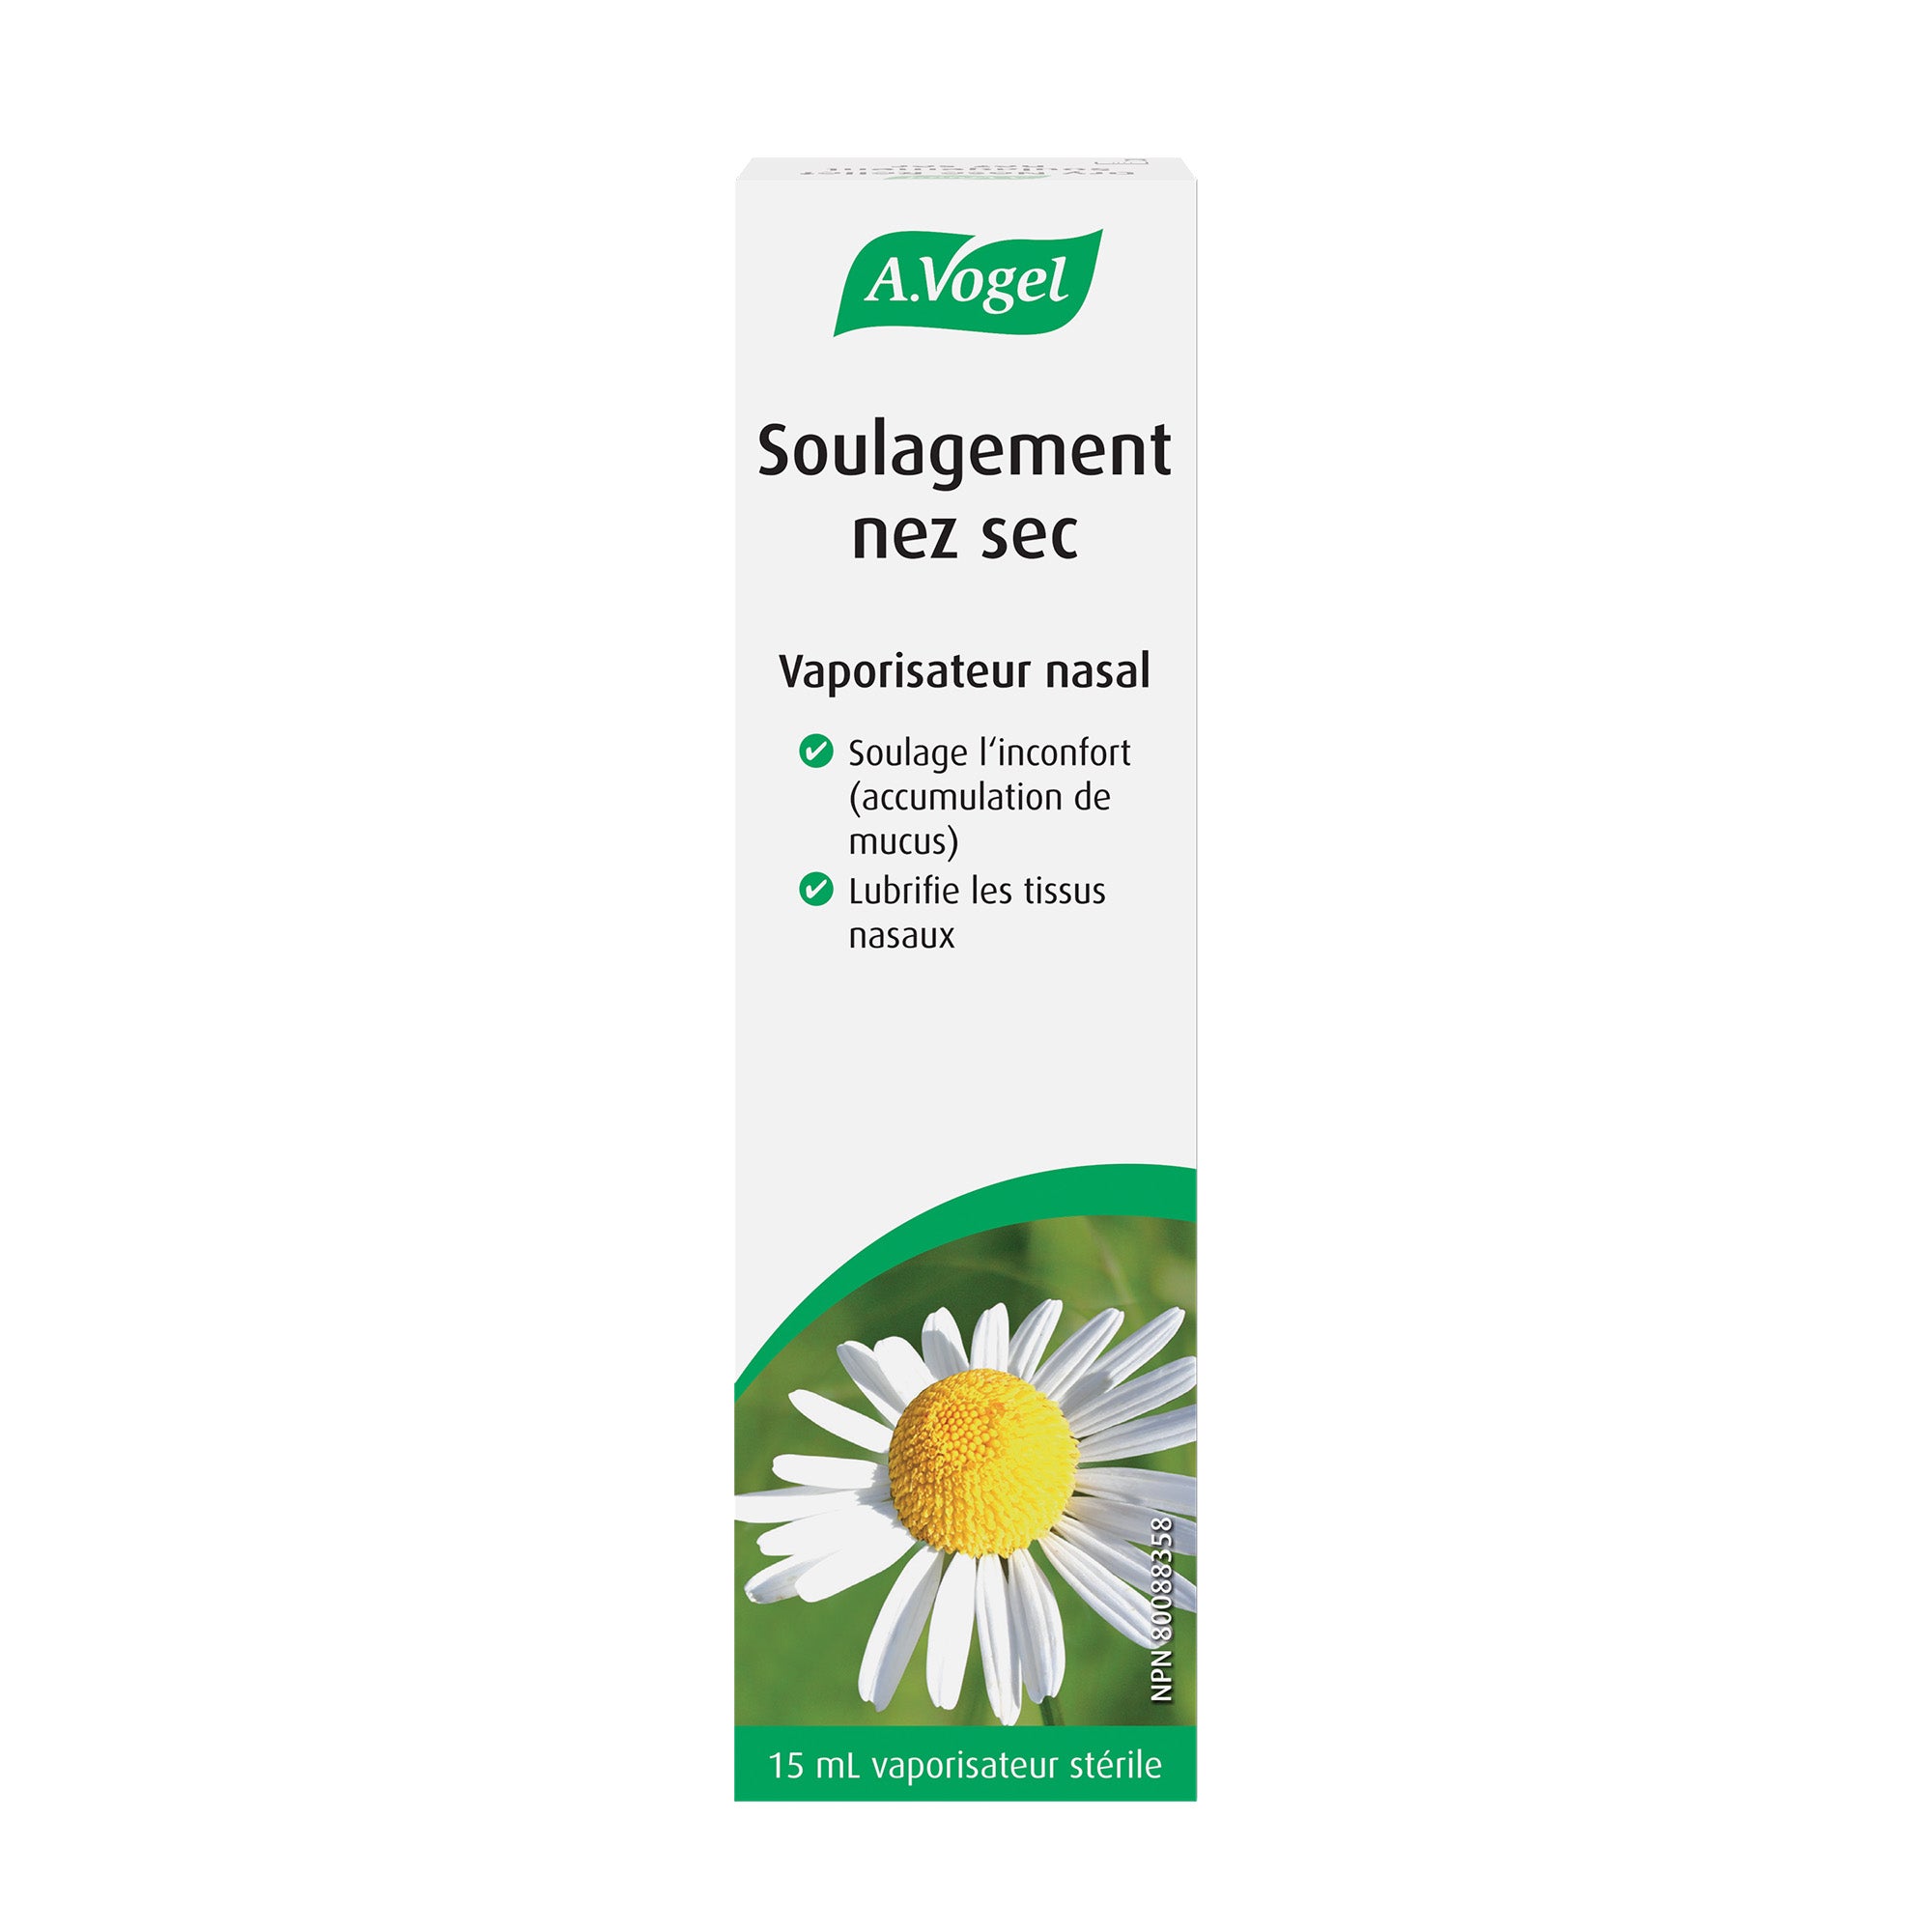 A. Vogel Dry Nose Relief 15mL